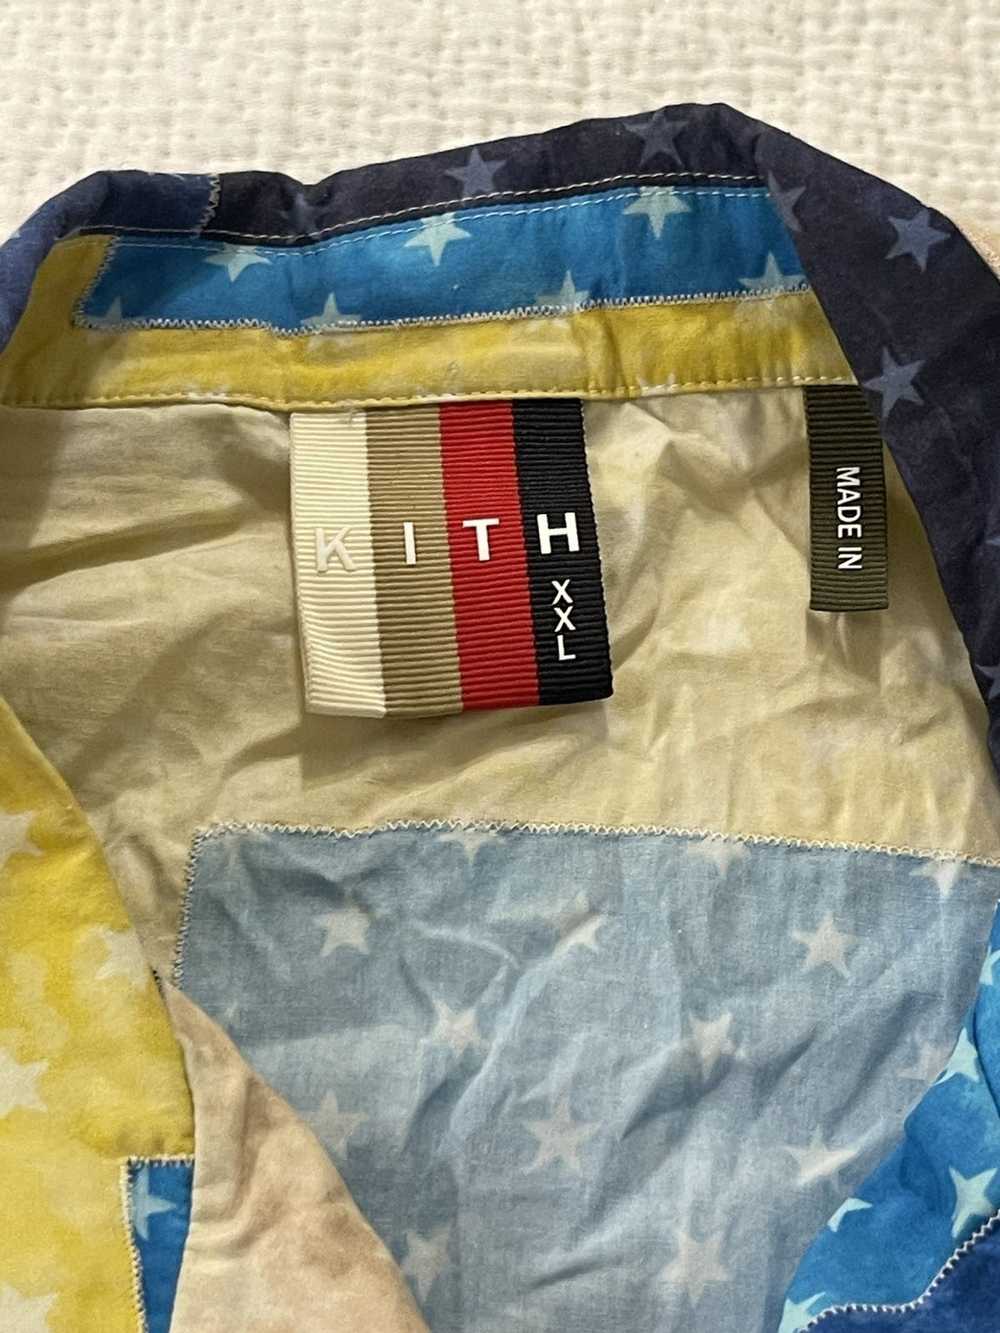 Kith Patch work kith tshirt - image 2